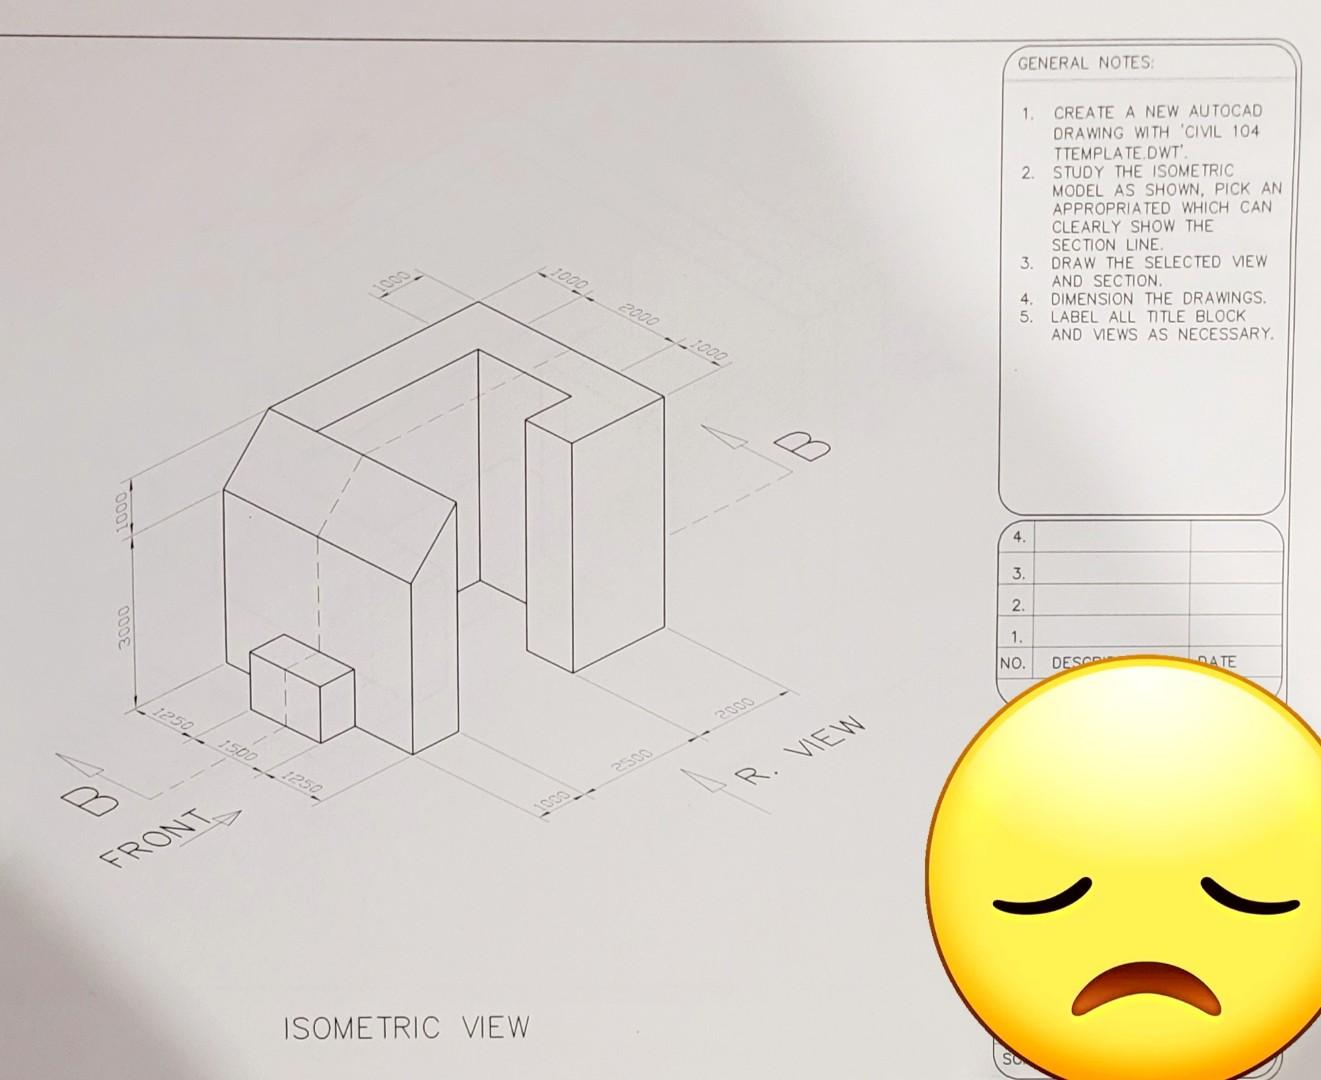 Why is my AutoCAD drawing so small? - Quora